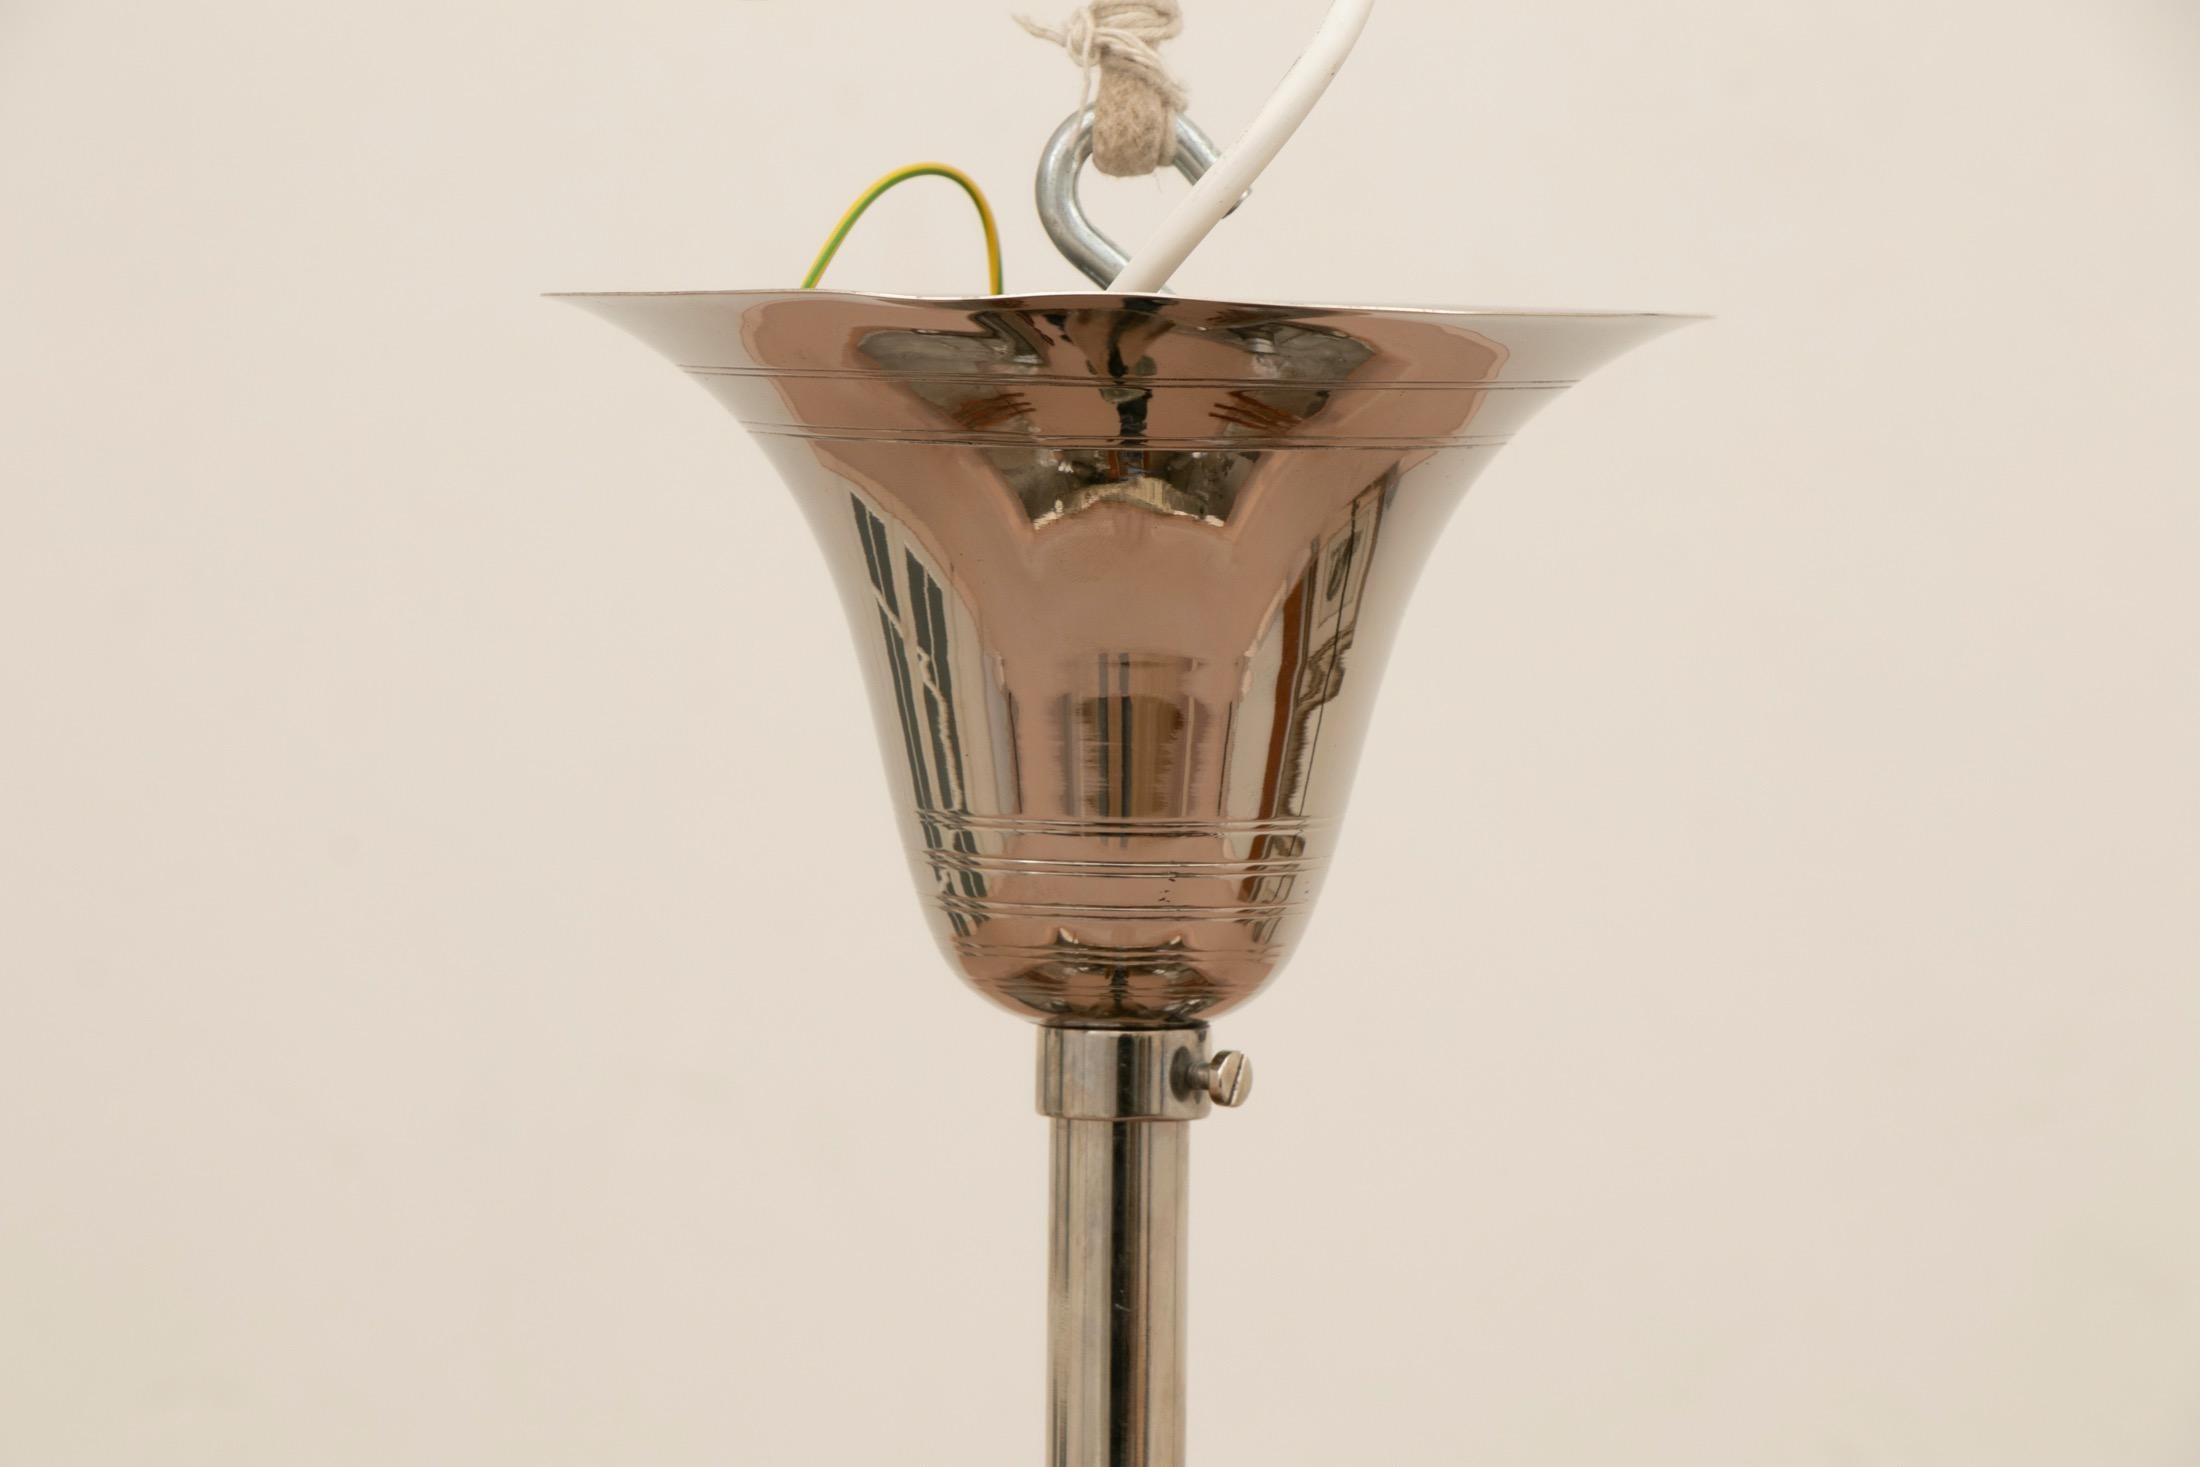 French Art Deco Peach Glass Ceiling Light by Atelier Petitot, circa 1930 For Sale 2